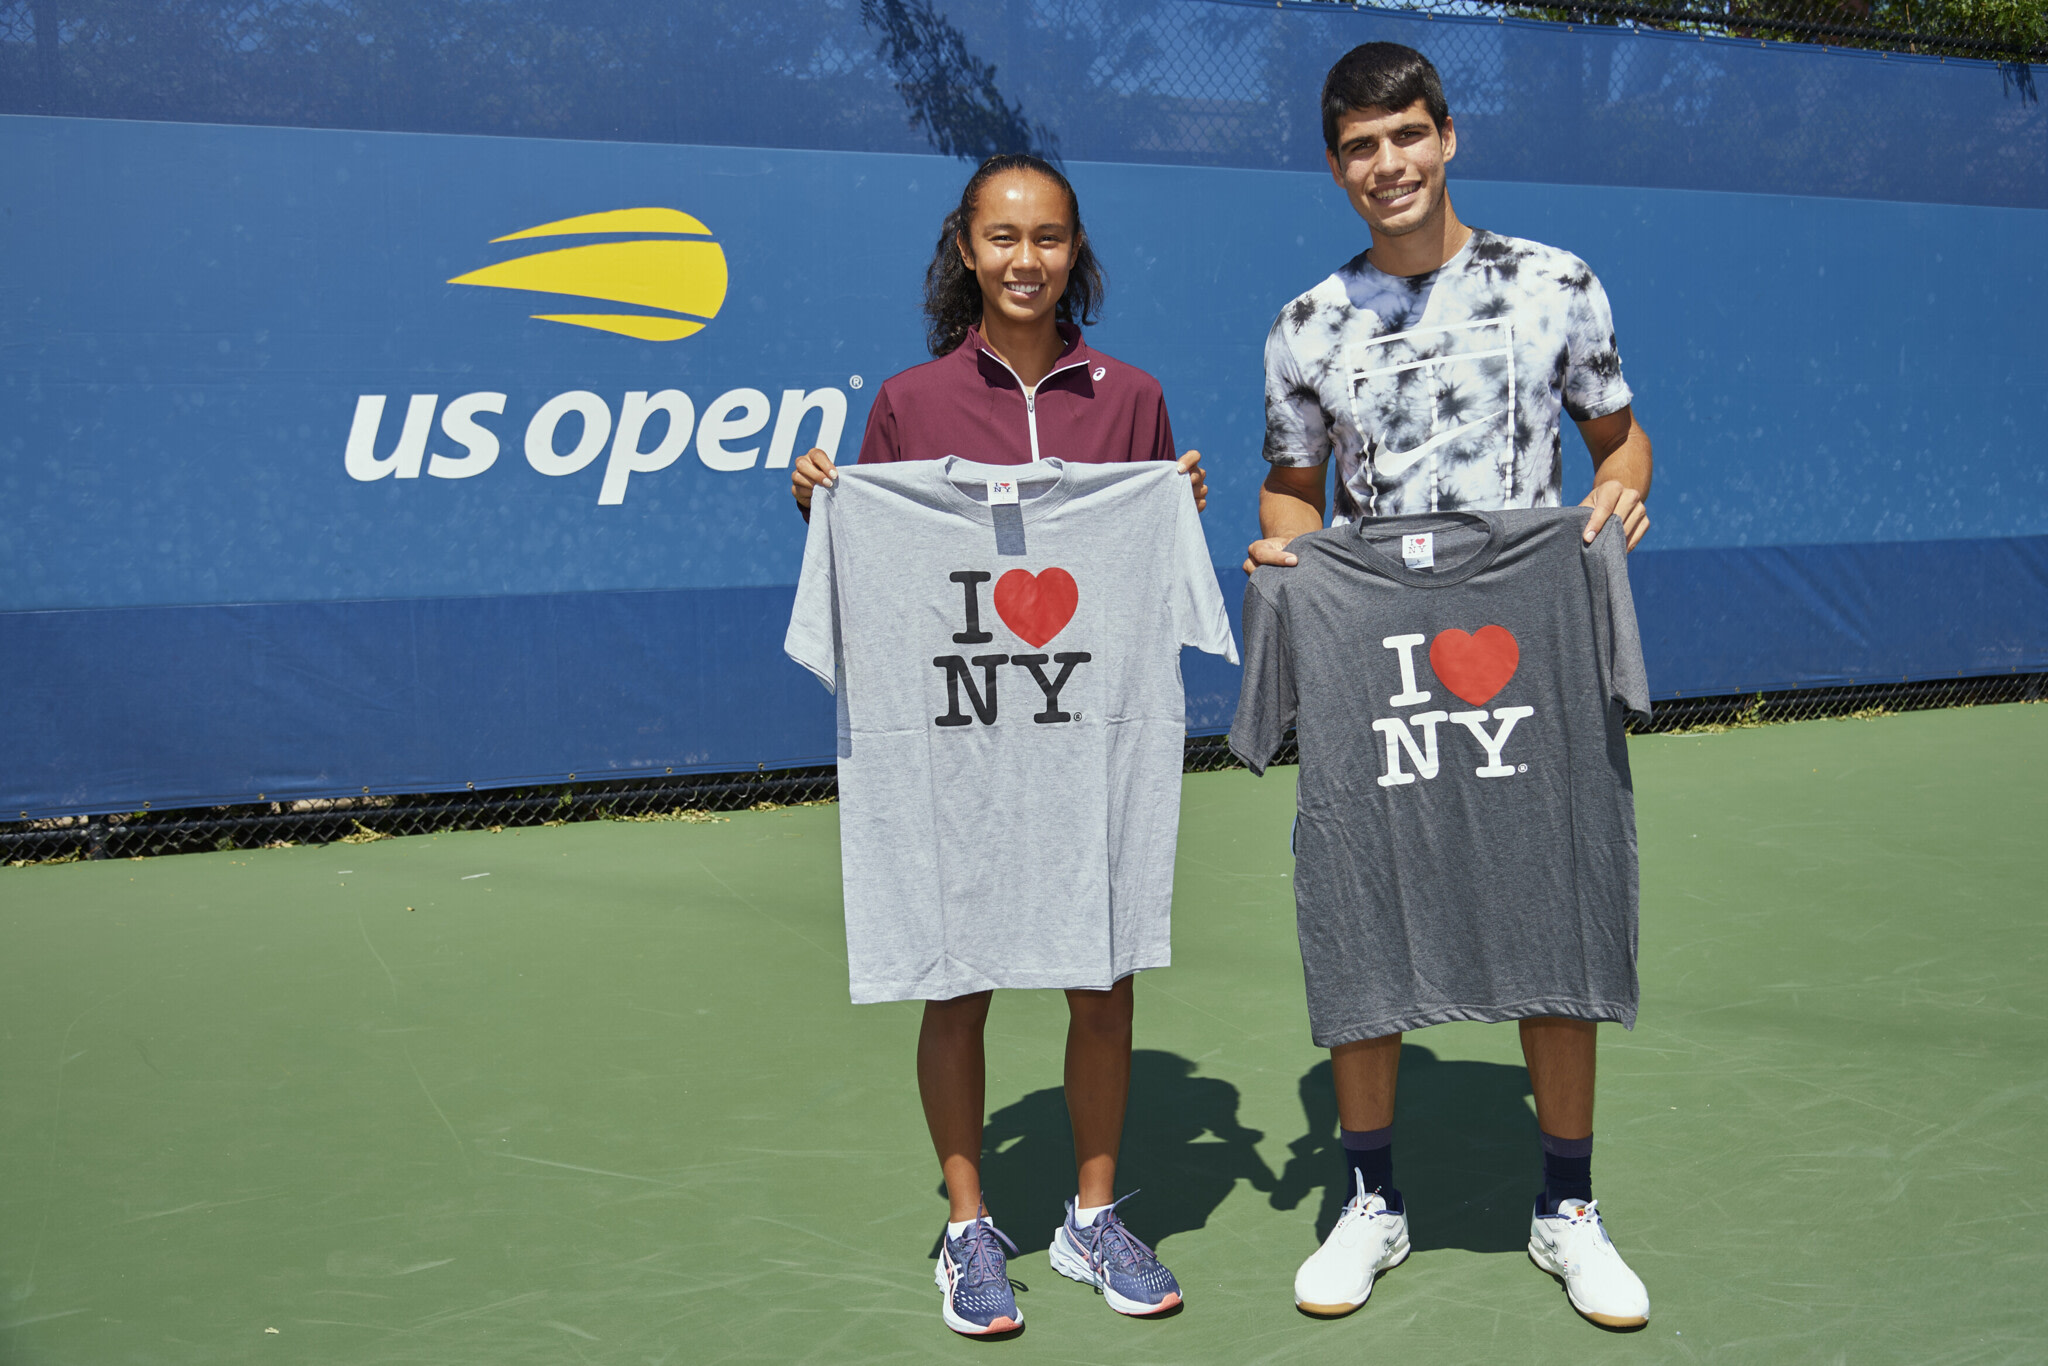 Leylah Fernandez and Carlos Alcaraz meet up following their epic victories at the US Open